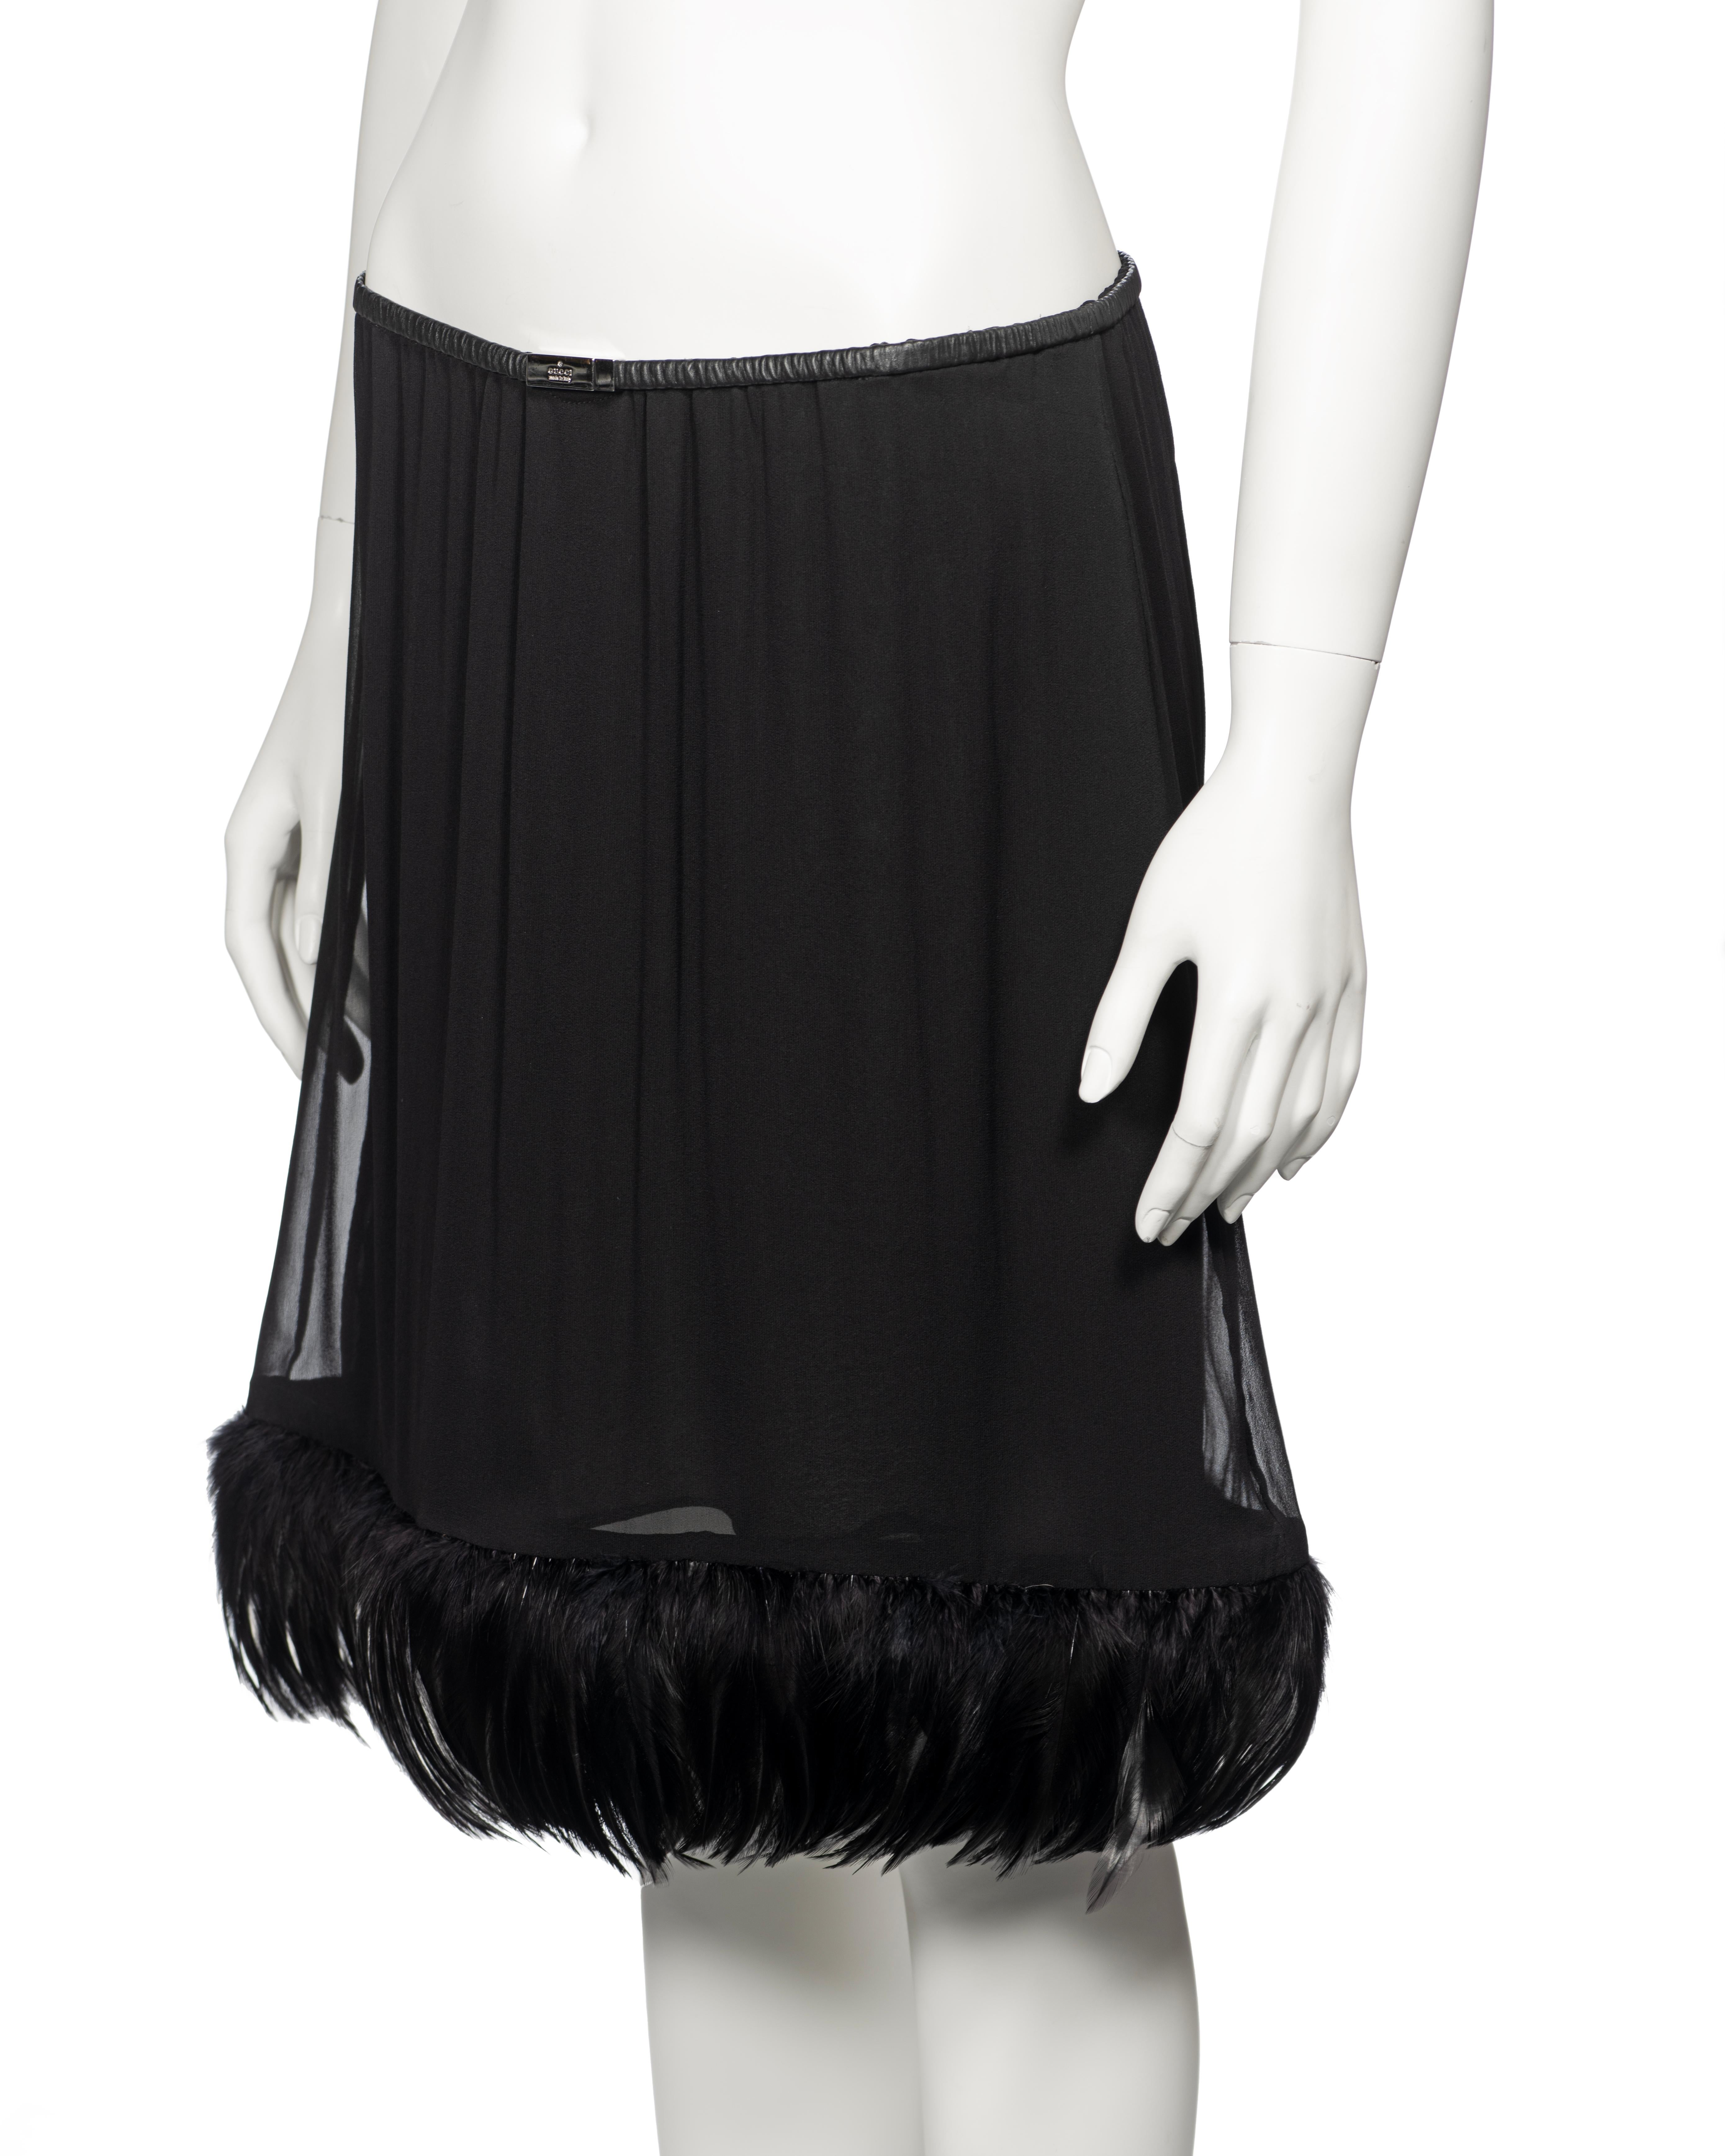 Gucci by Tom Ford Black Silk Evening Skirt With Feathers, ss 1999 For Sale 7